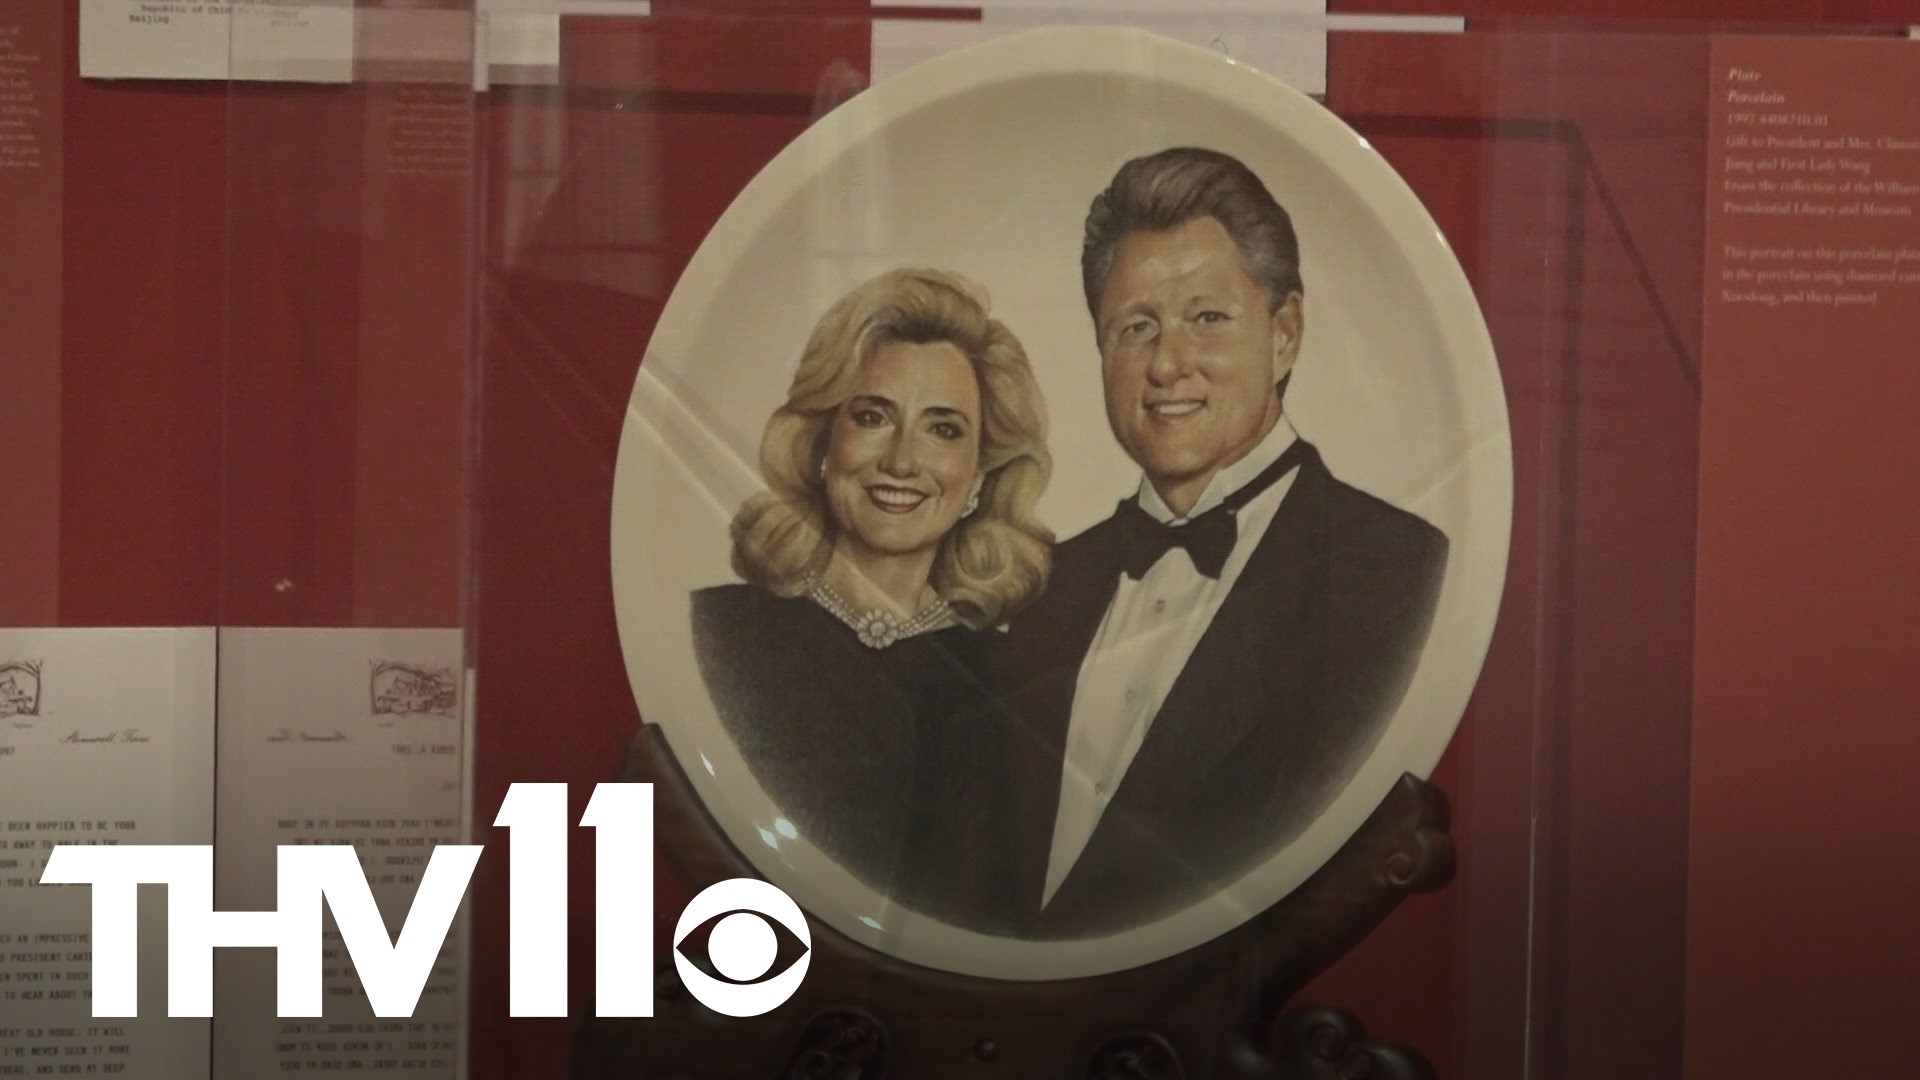 A new exhibit is now open at the Clinton Library, showing a side of Bill Clinton’s presidency most people never saw.